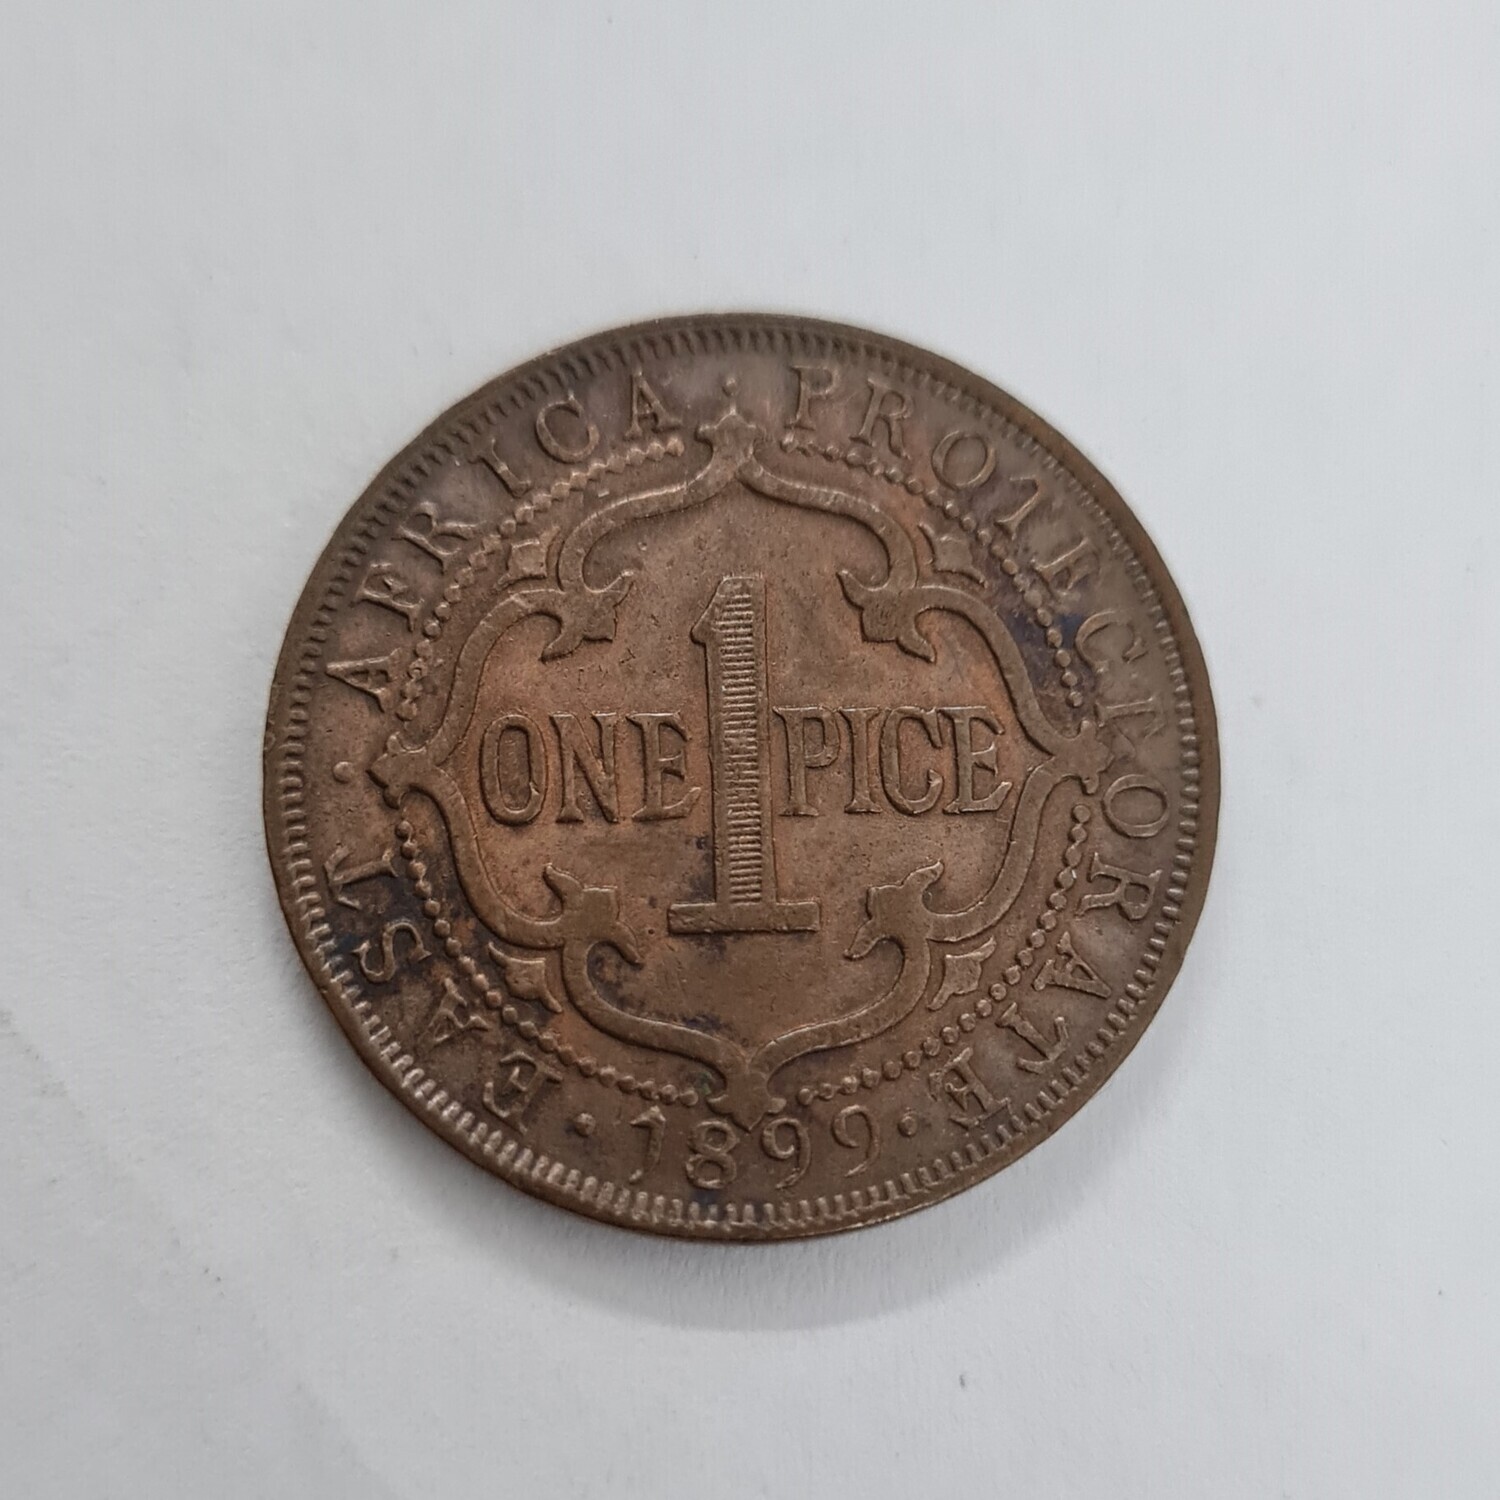 1 PICE - VICTORIA EAST AFRICA PROTECTORATE